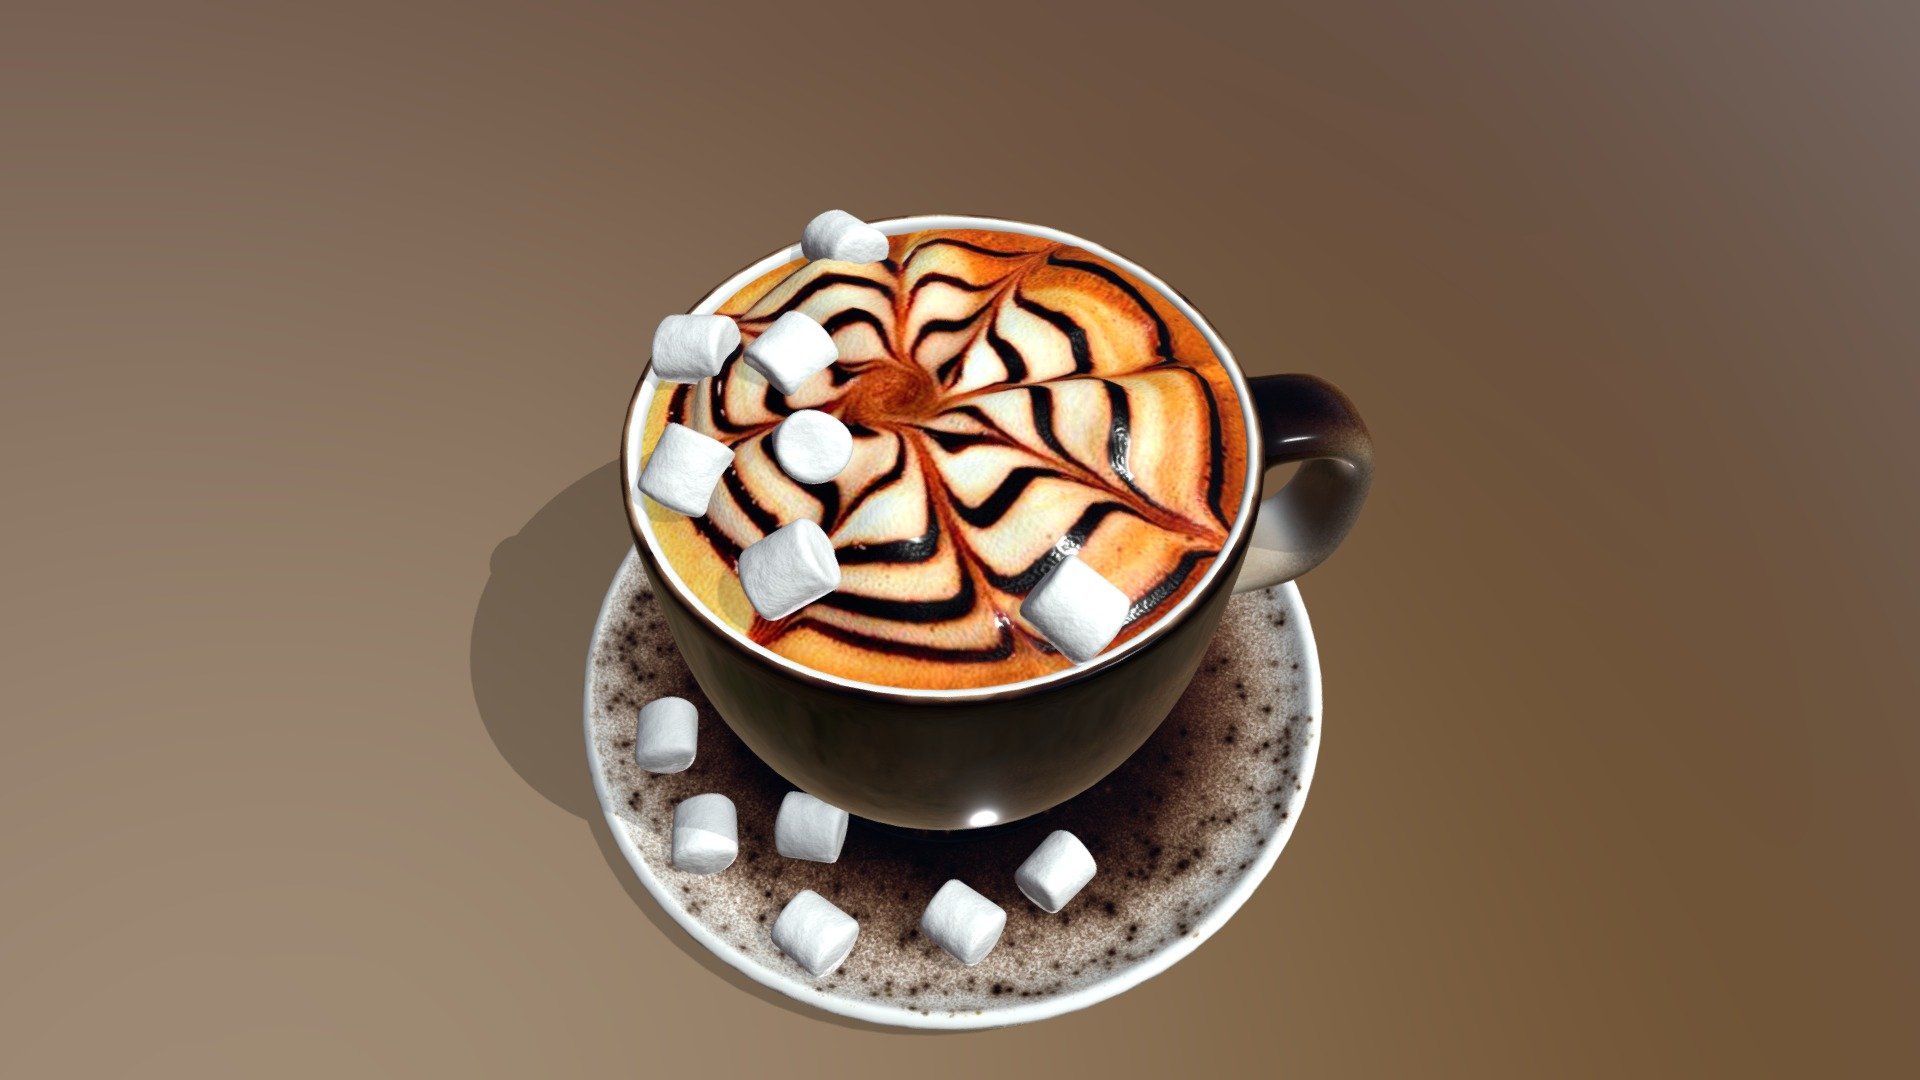 It's time for a walk. I'll stop by a coffee shop and have a wonderful cup of cappuccino. :)

texture resolution 2048x2048p
model in cm - Cup of cappuccino - Download Free 3D model by Elen (@Kitty999) 3d model